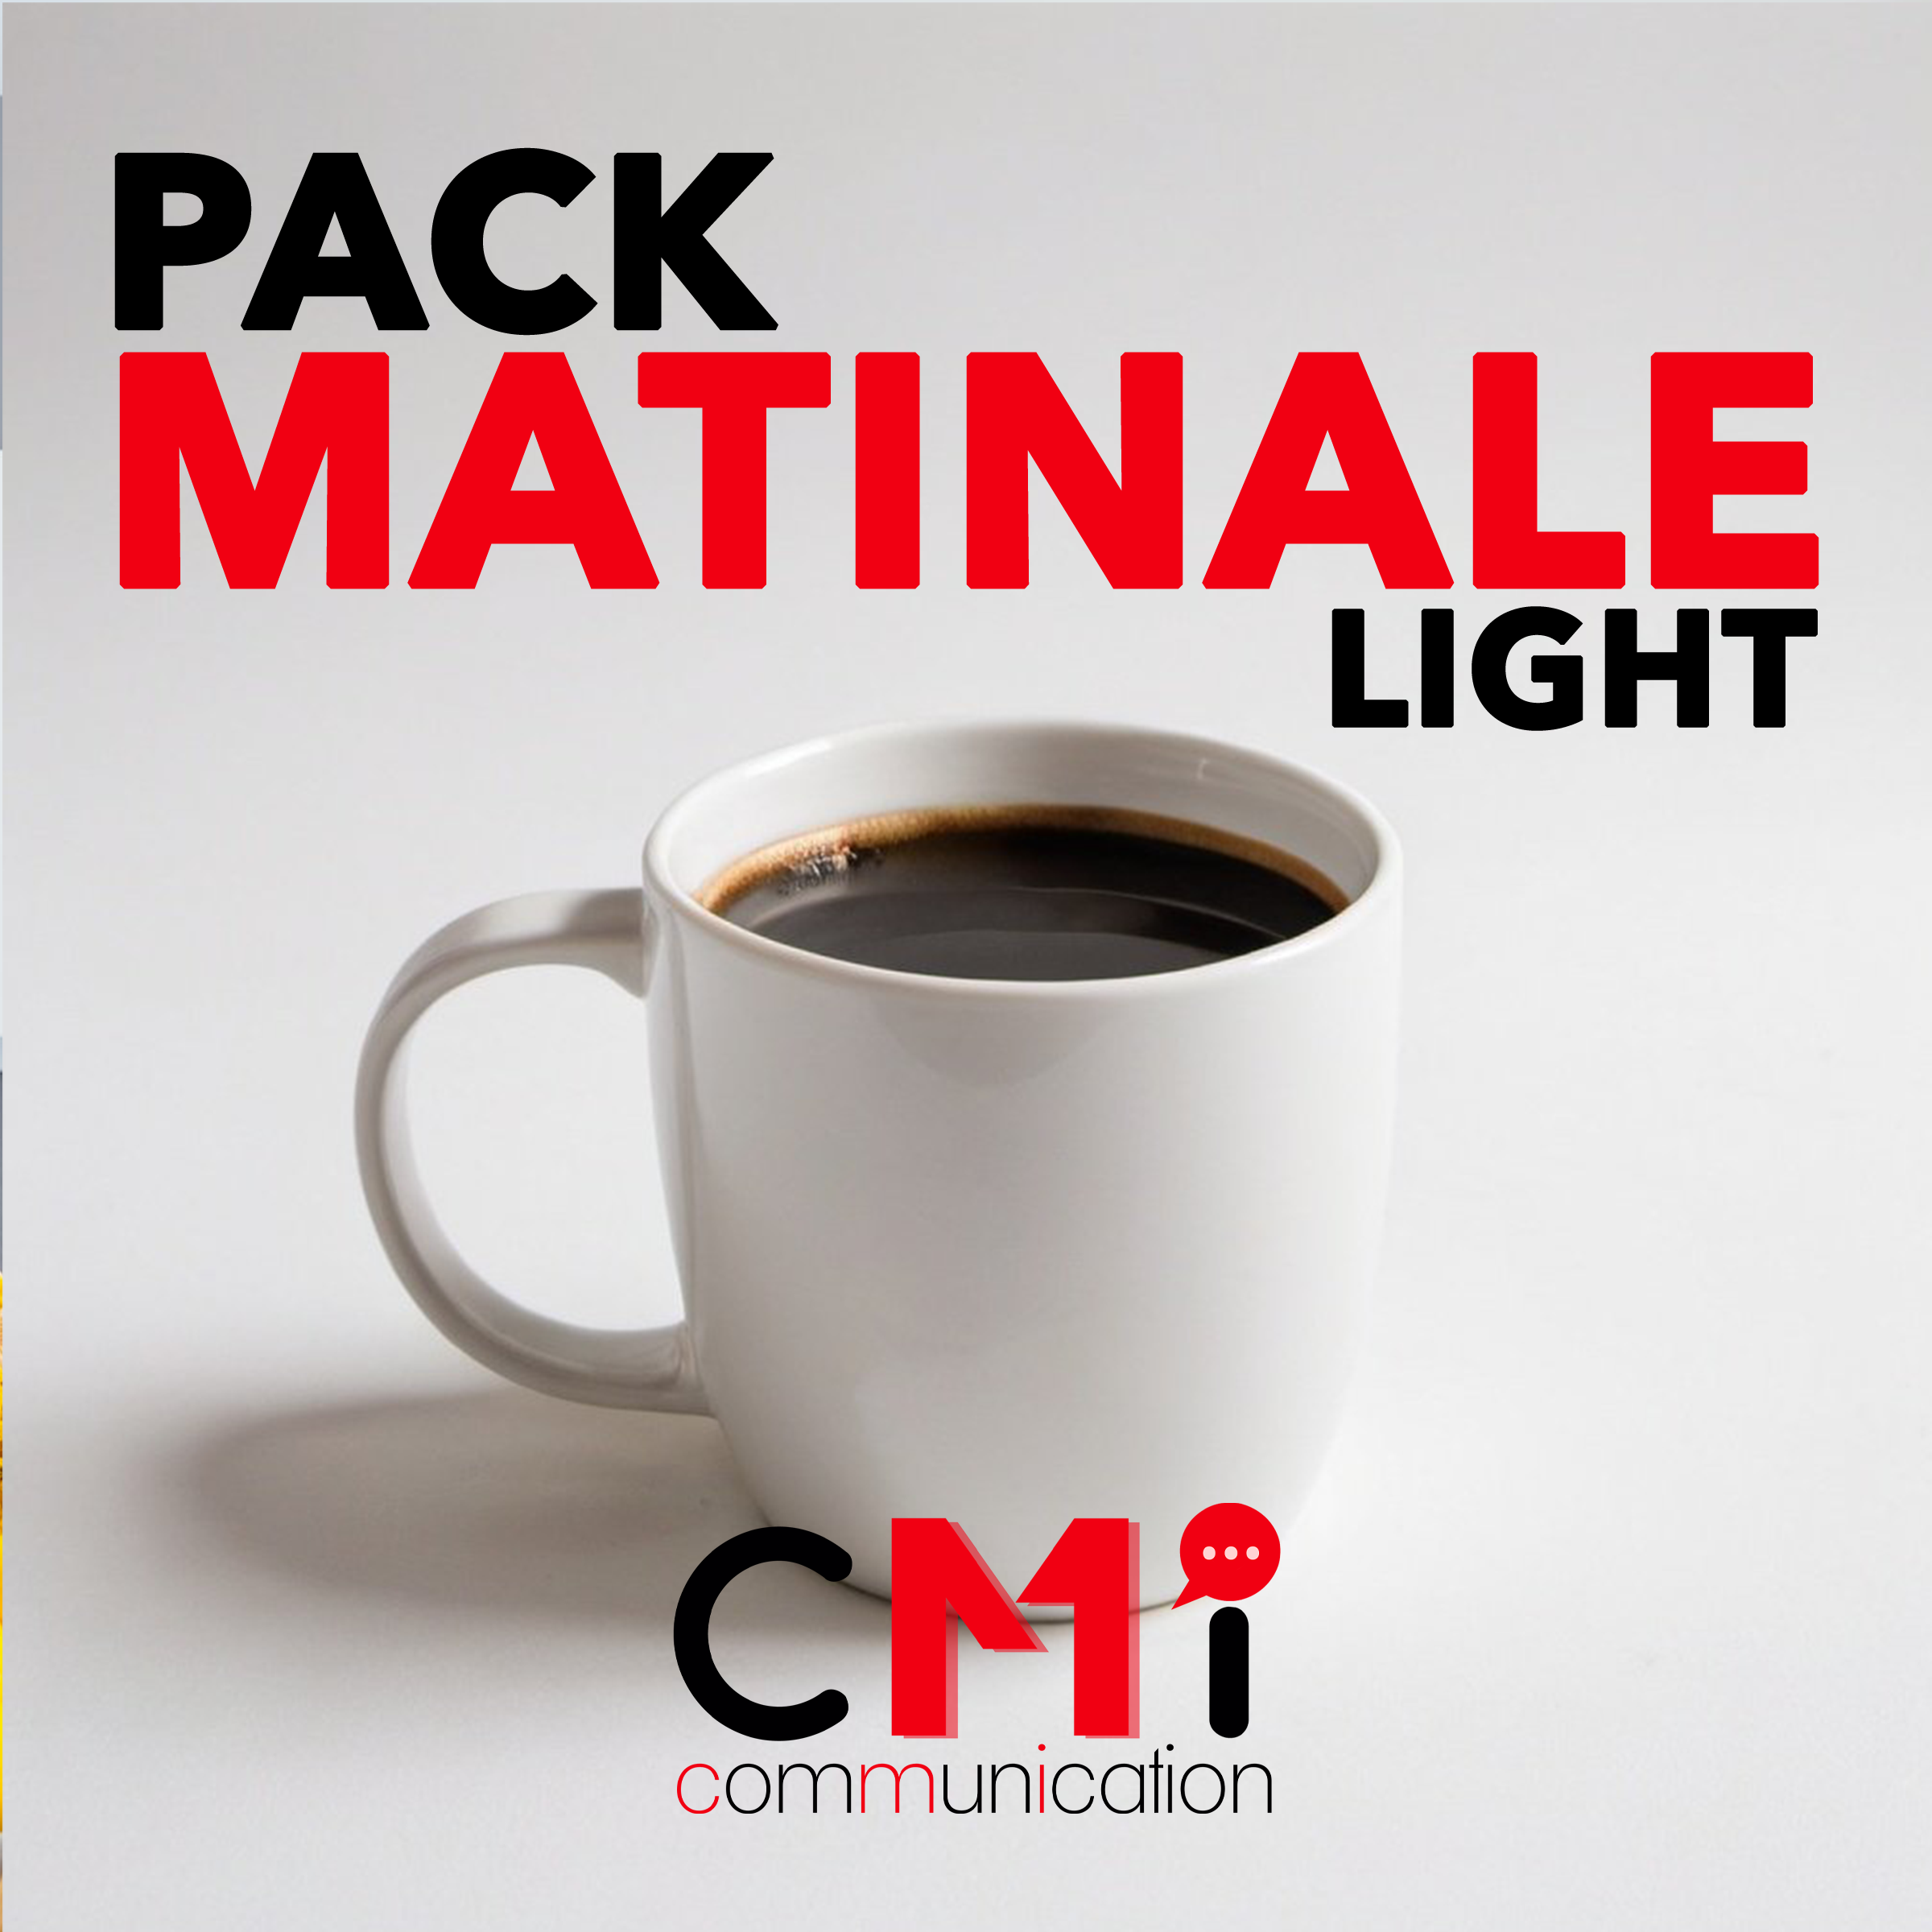 Pack matinale light